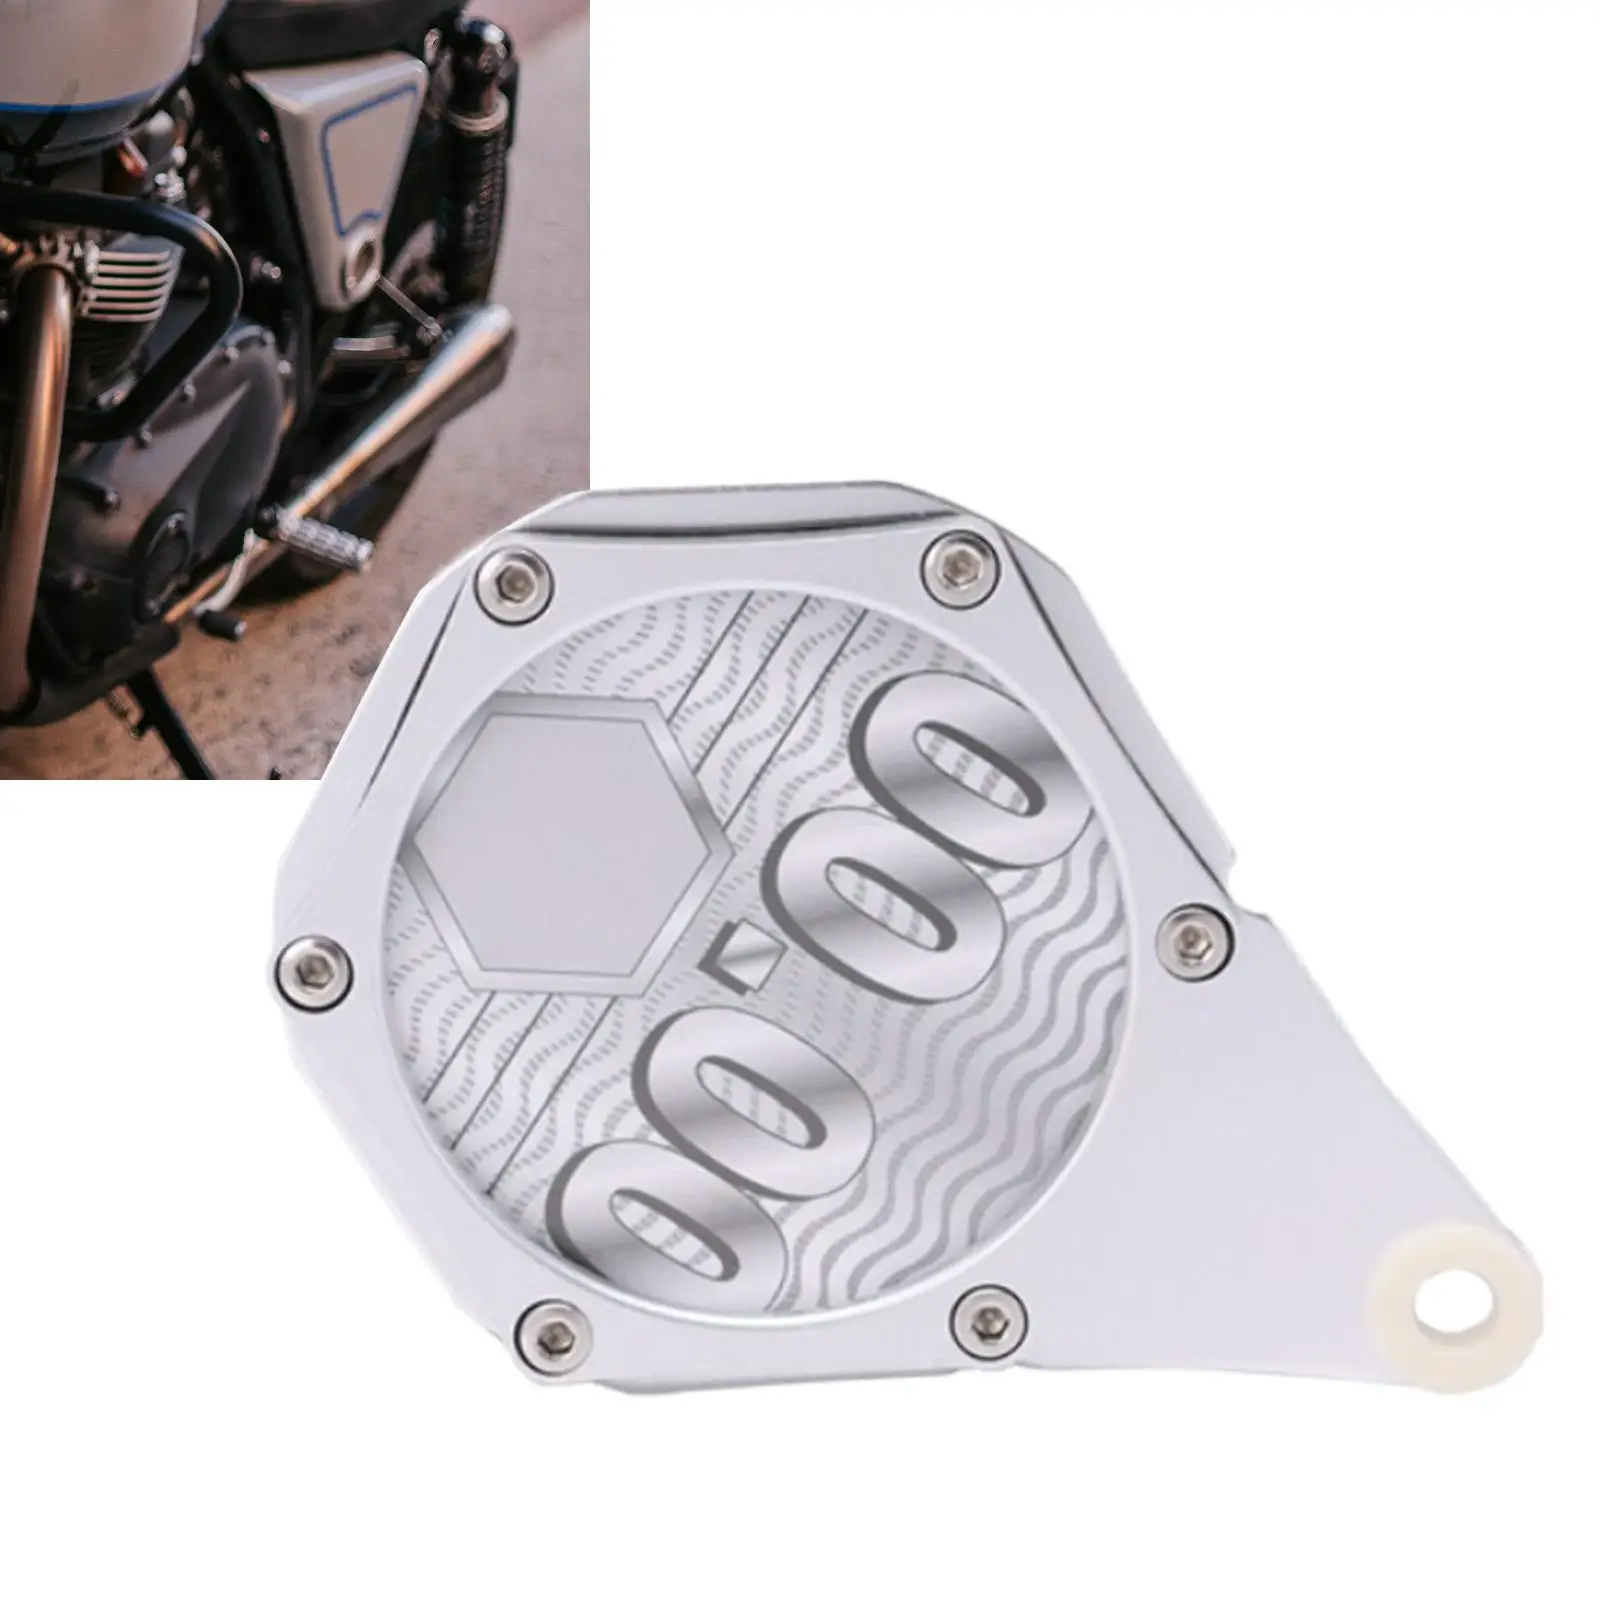 Hexagon Tax Disc Plate Universal Motorcycle Accessories for Scooter Motor Easy